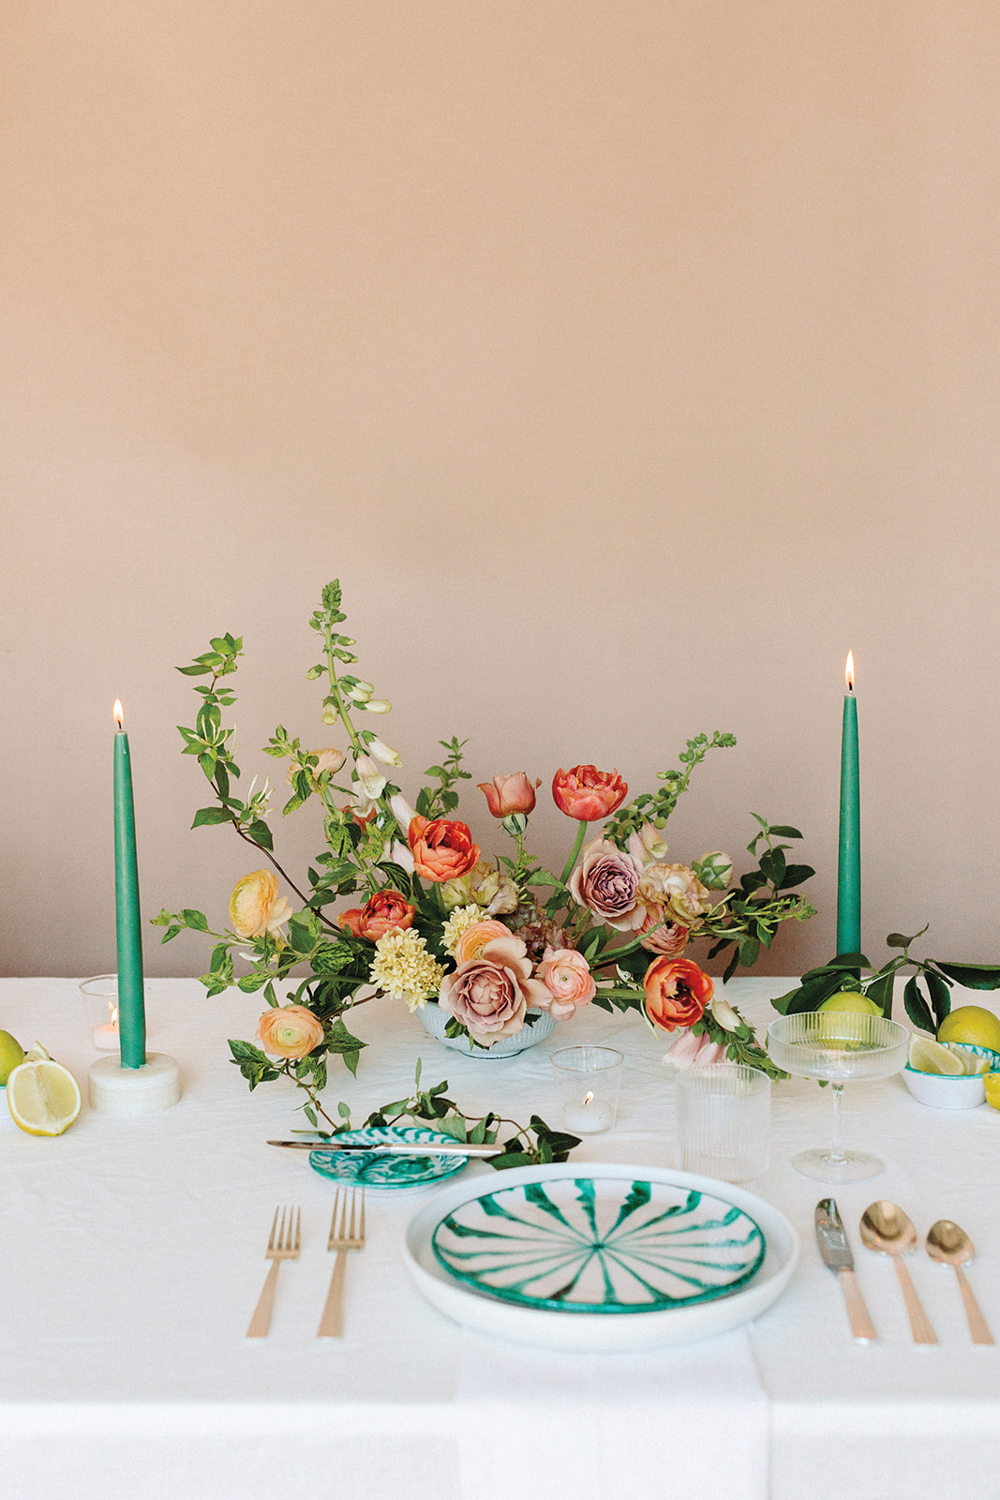 Tablescape with green candles and red, pink and yellow florals.